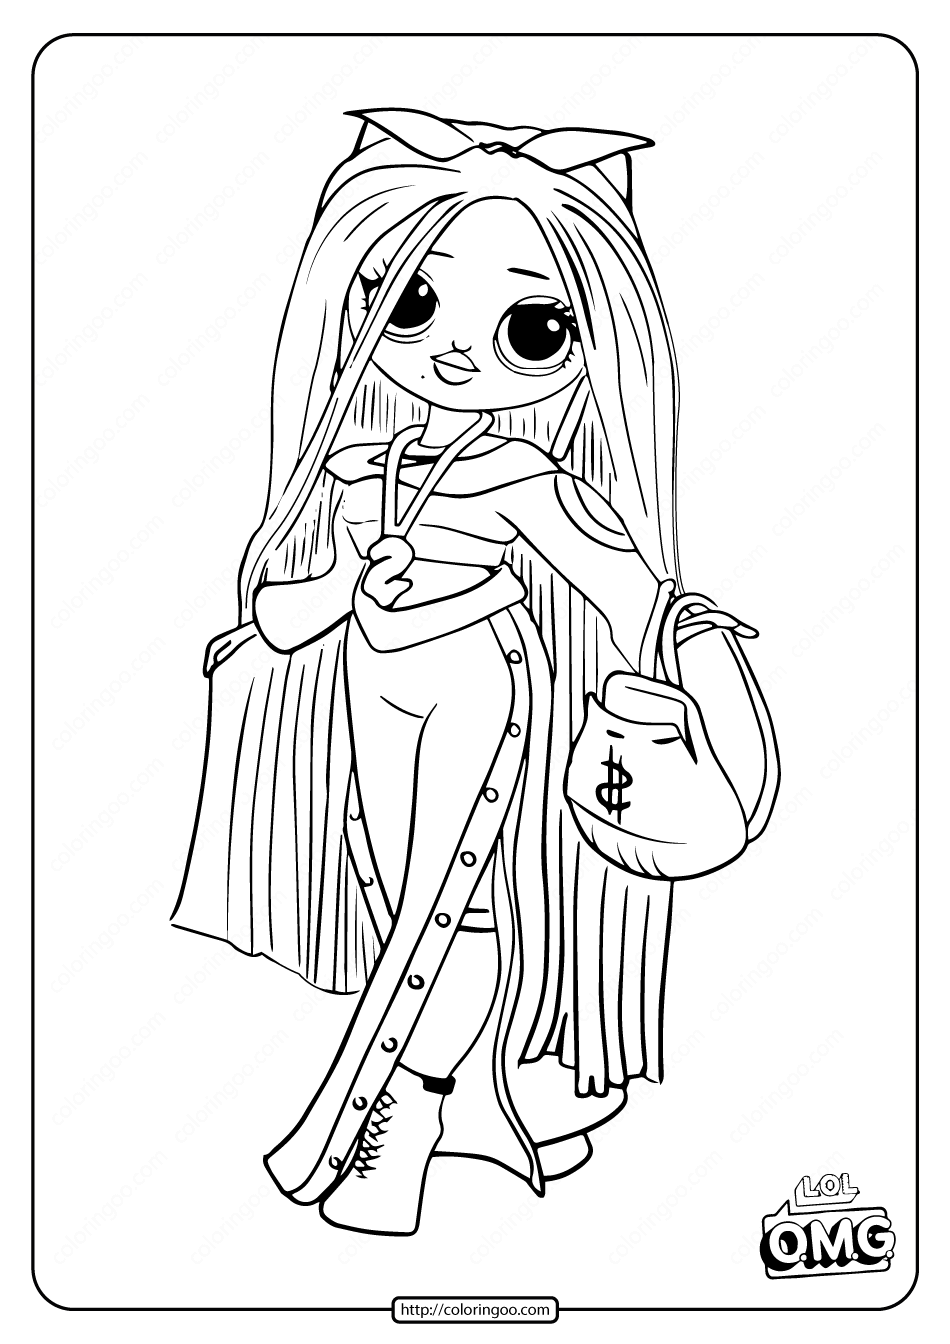 Lol surprise omg swag fashion doll coloring page horse coloring pages doll drawing cute coloring pages